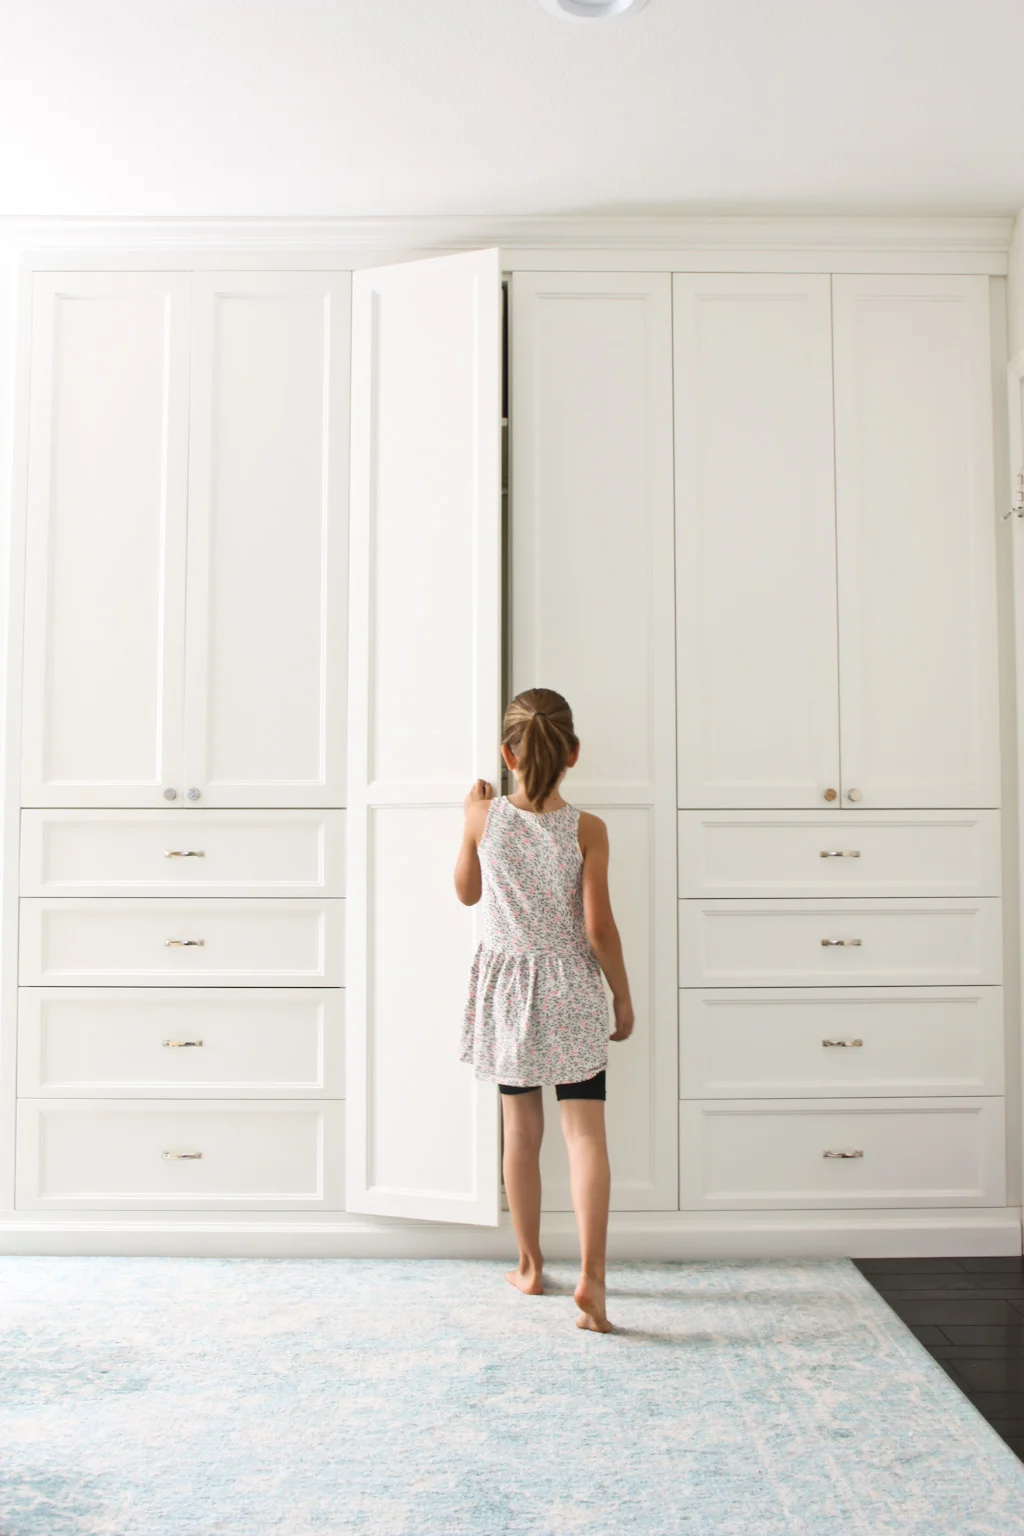 Guest bedroom closet ideas. White closet built-ins with drawers. Rug on the ground in front of the built in closet.